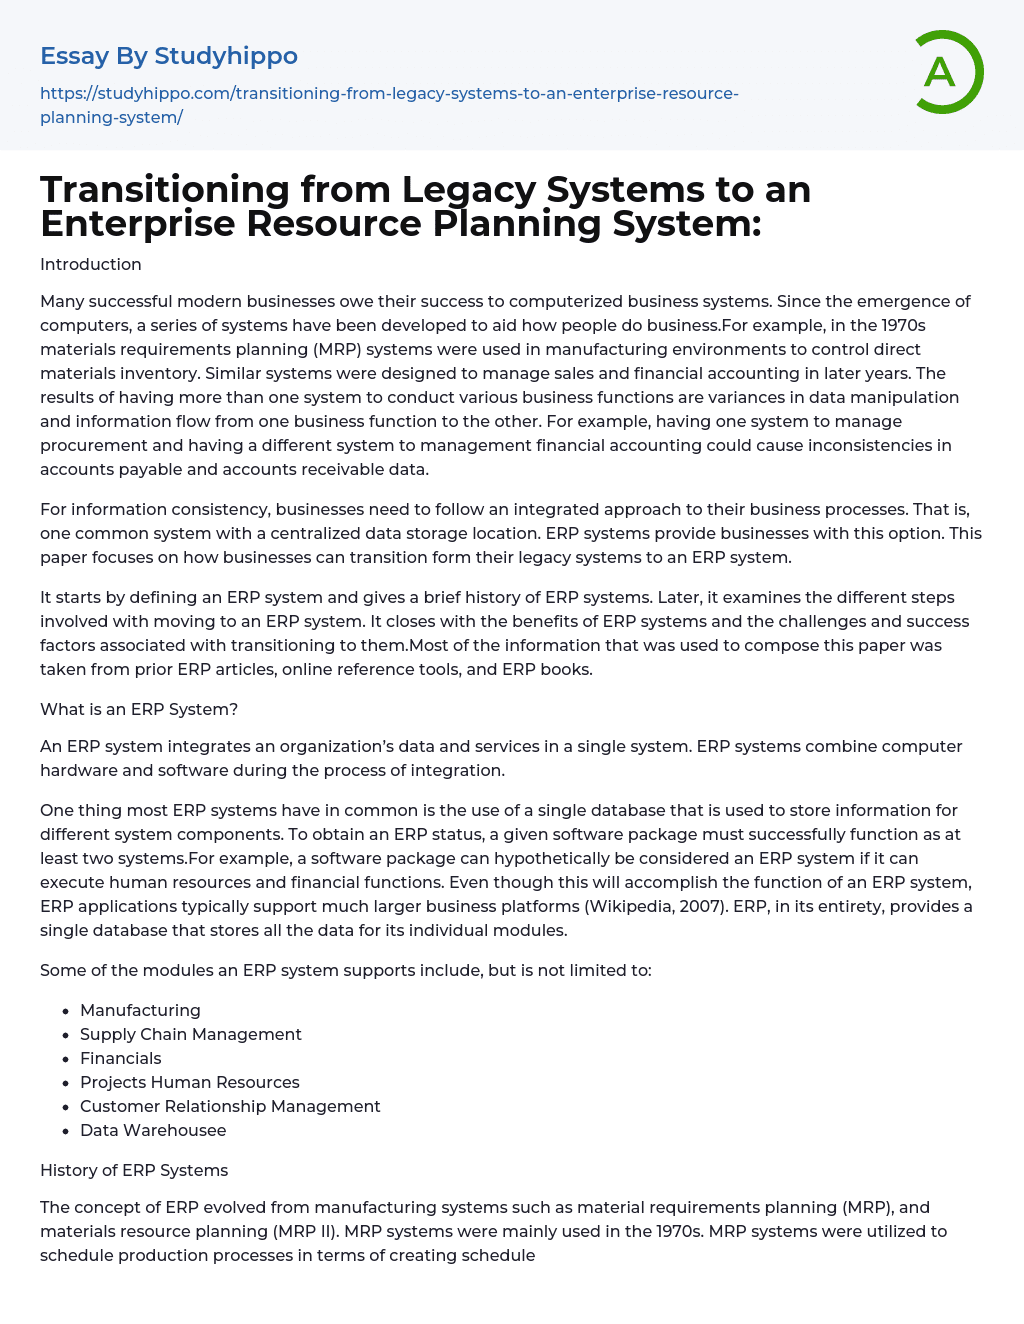 Transitioning from Legacy Systems to an Enterprise Resource Planning System: Essay Example